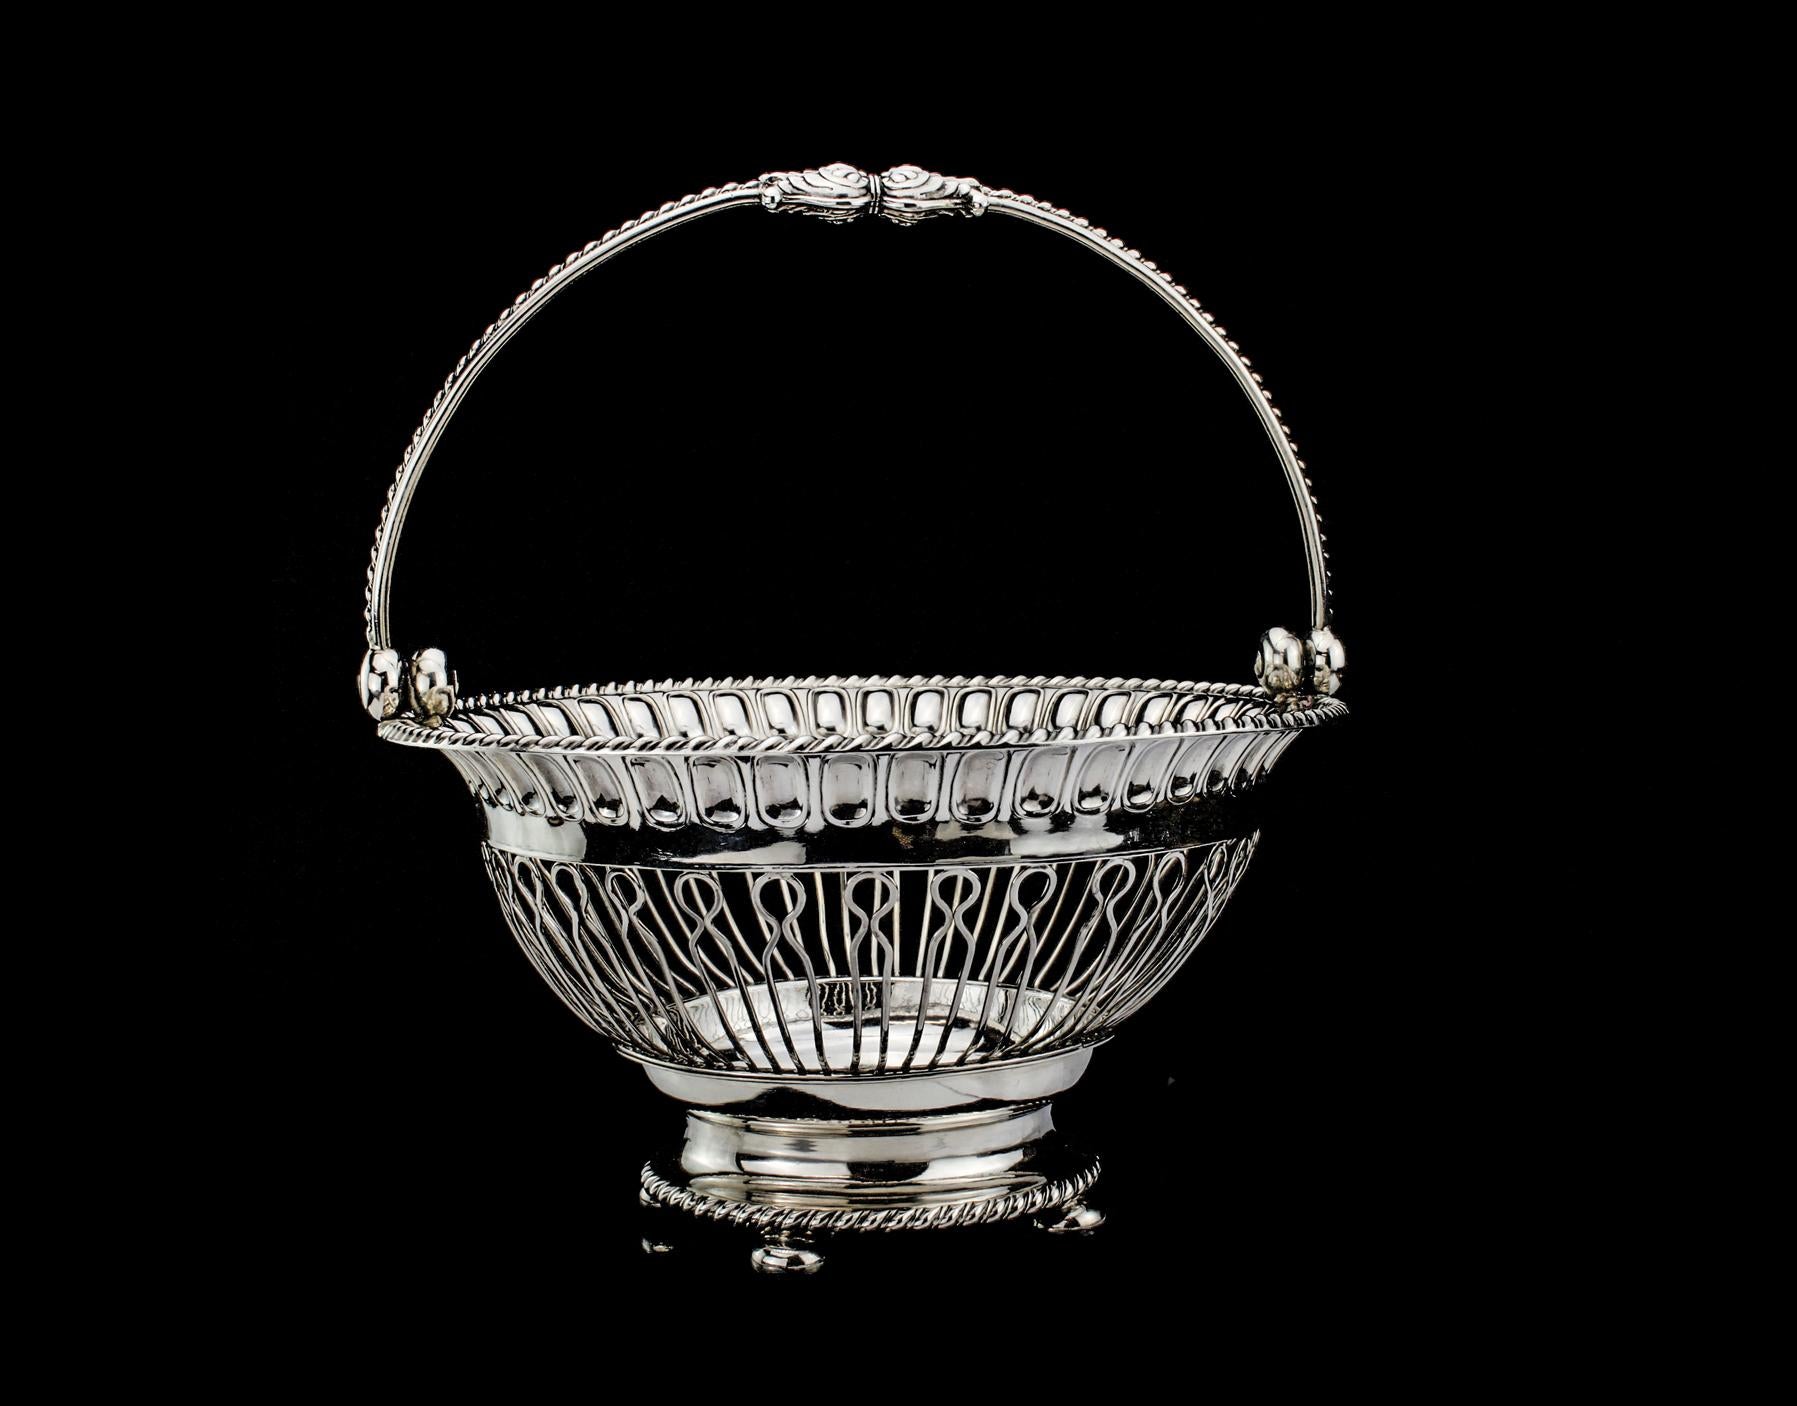 Antique Georgian fruit basket 
Maker: TW &Co. ( unidentified ) 
Made in England, Sheffield, 1812
Fully hallmarked.

Dimensions - 
Diameter x Height - 24 x 13 cm 

Weight: 800 grams

Condition: Minor wear from general usage, no damage,